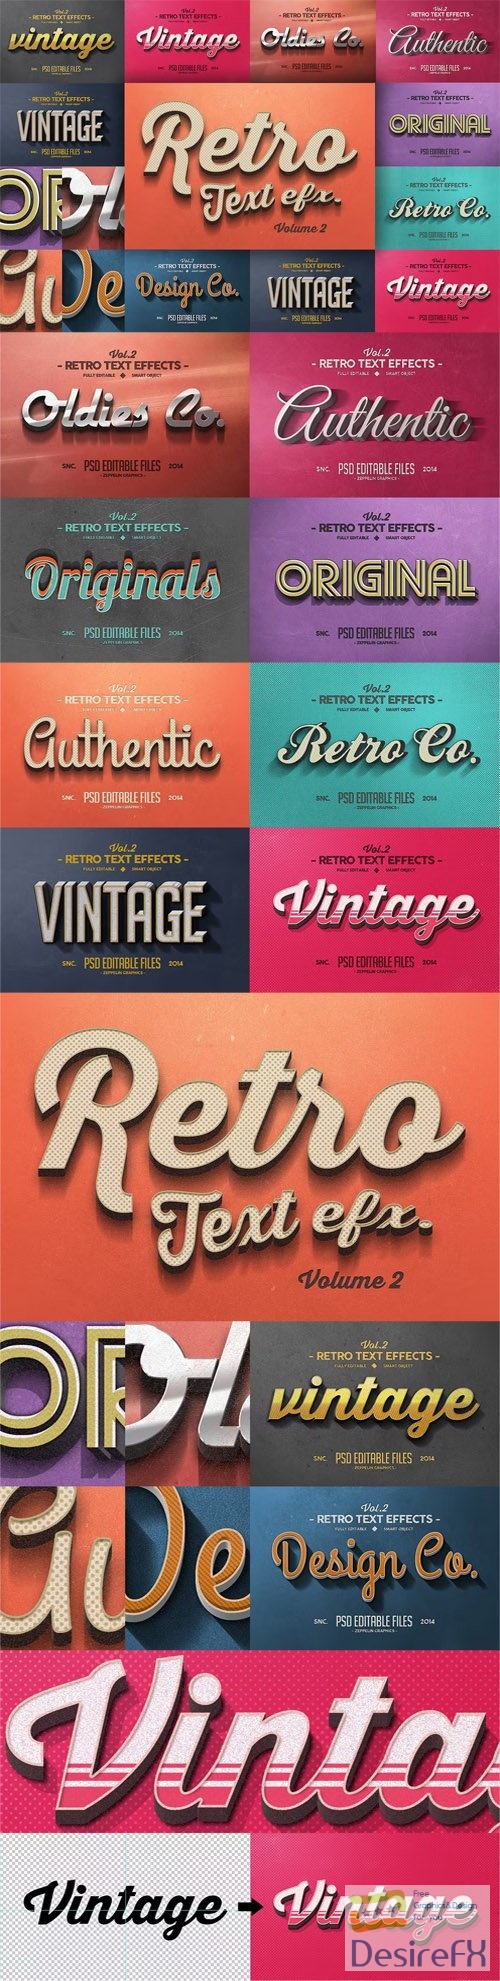 Vintage Text Effects Vol.2 for Photoshop